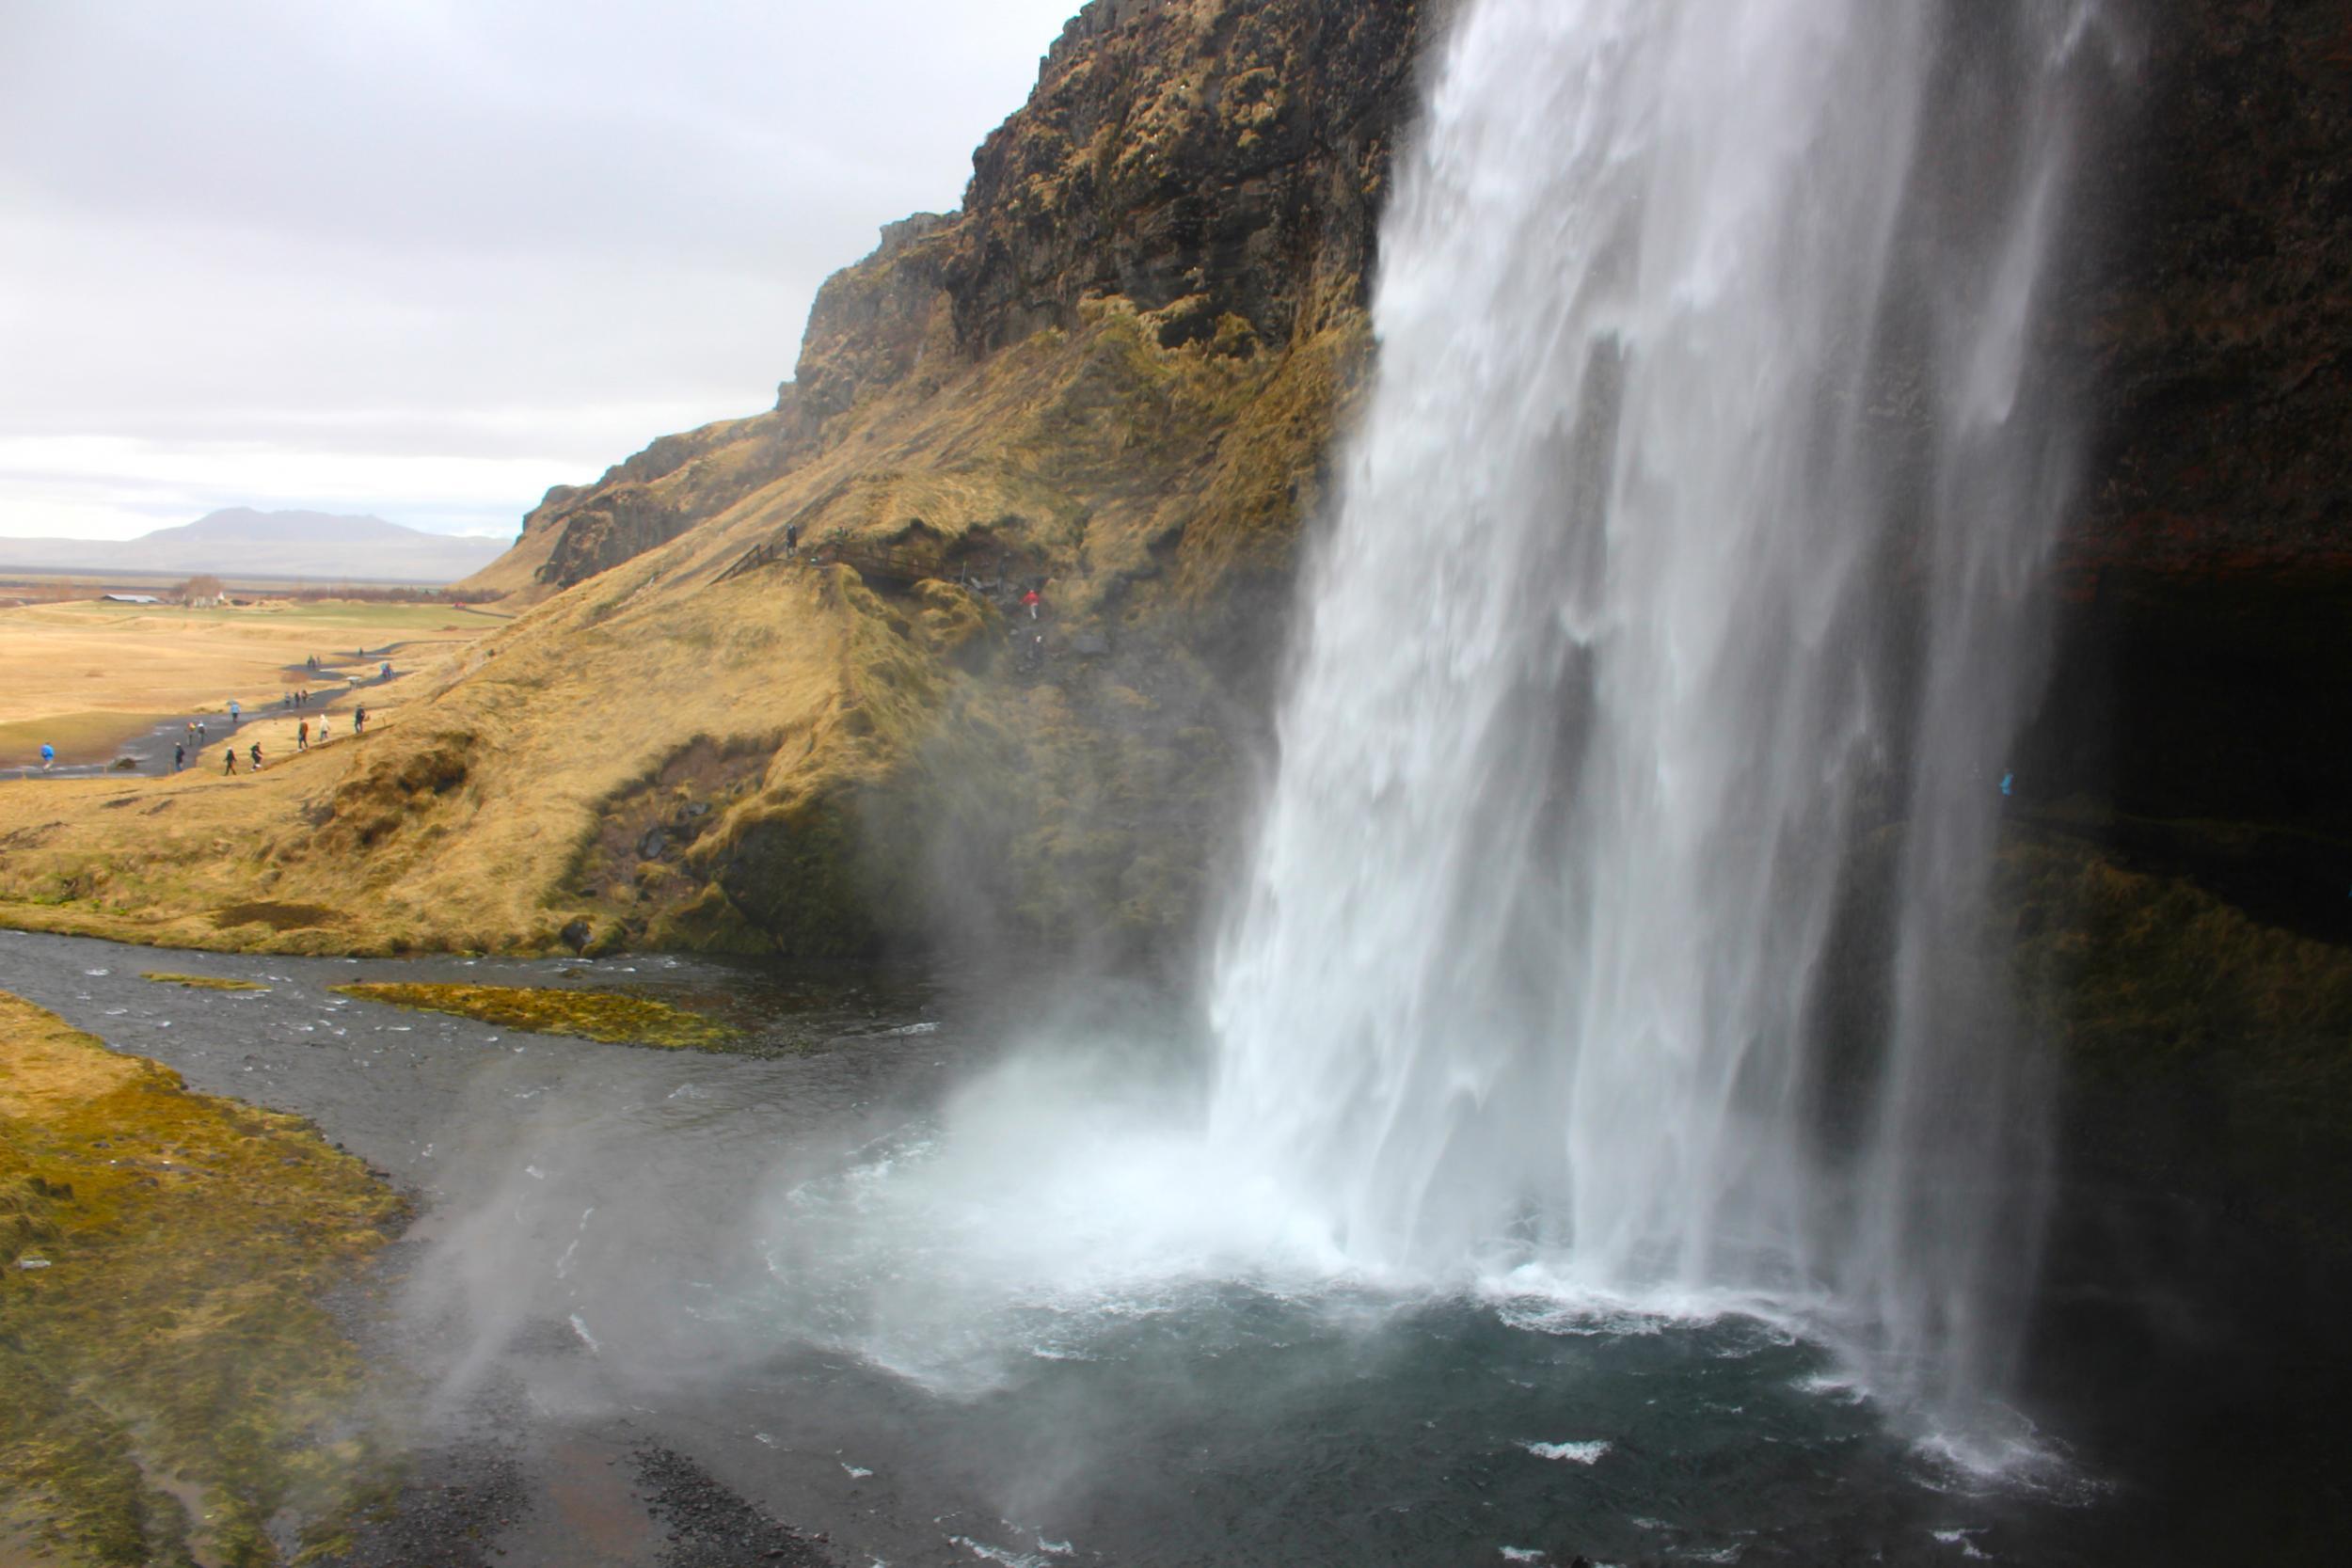 Tourists can stand behind the Seljalandsfoss waterfall to get the perfect shot